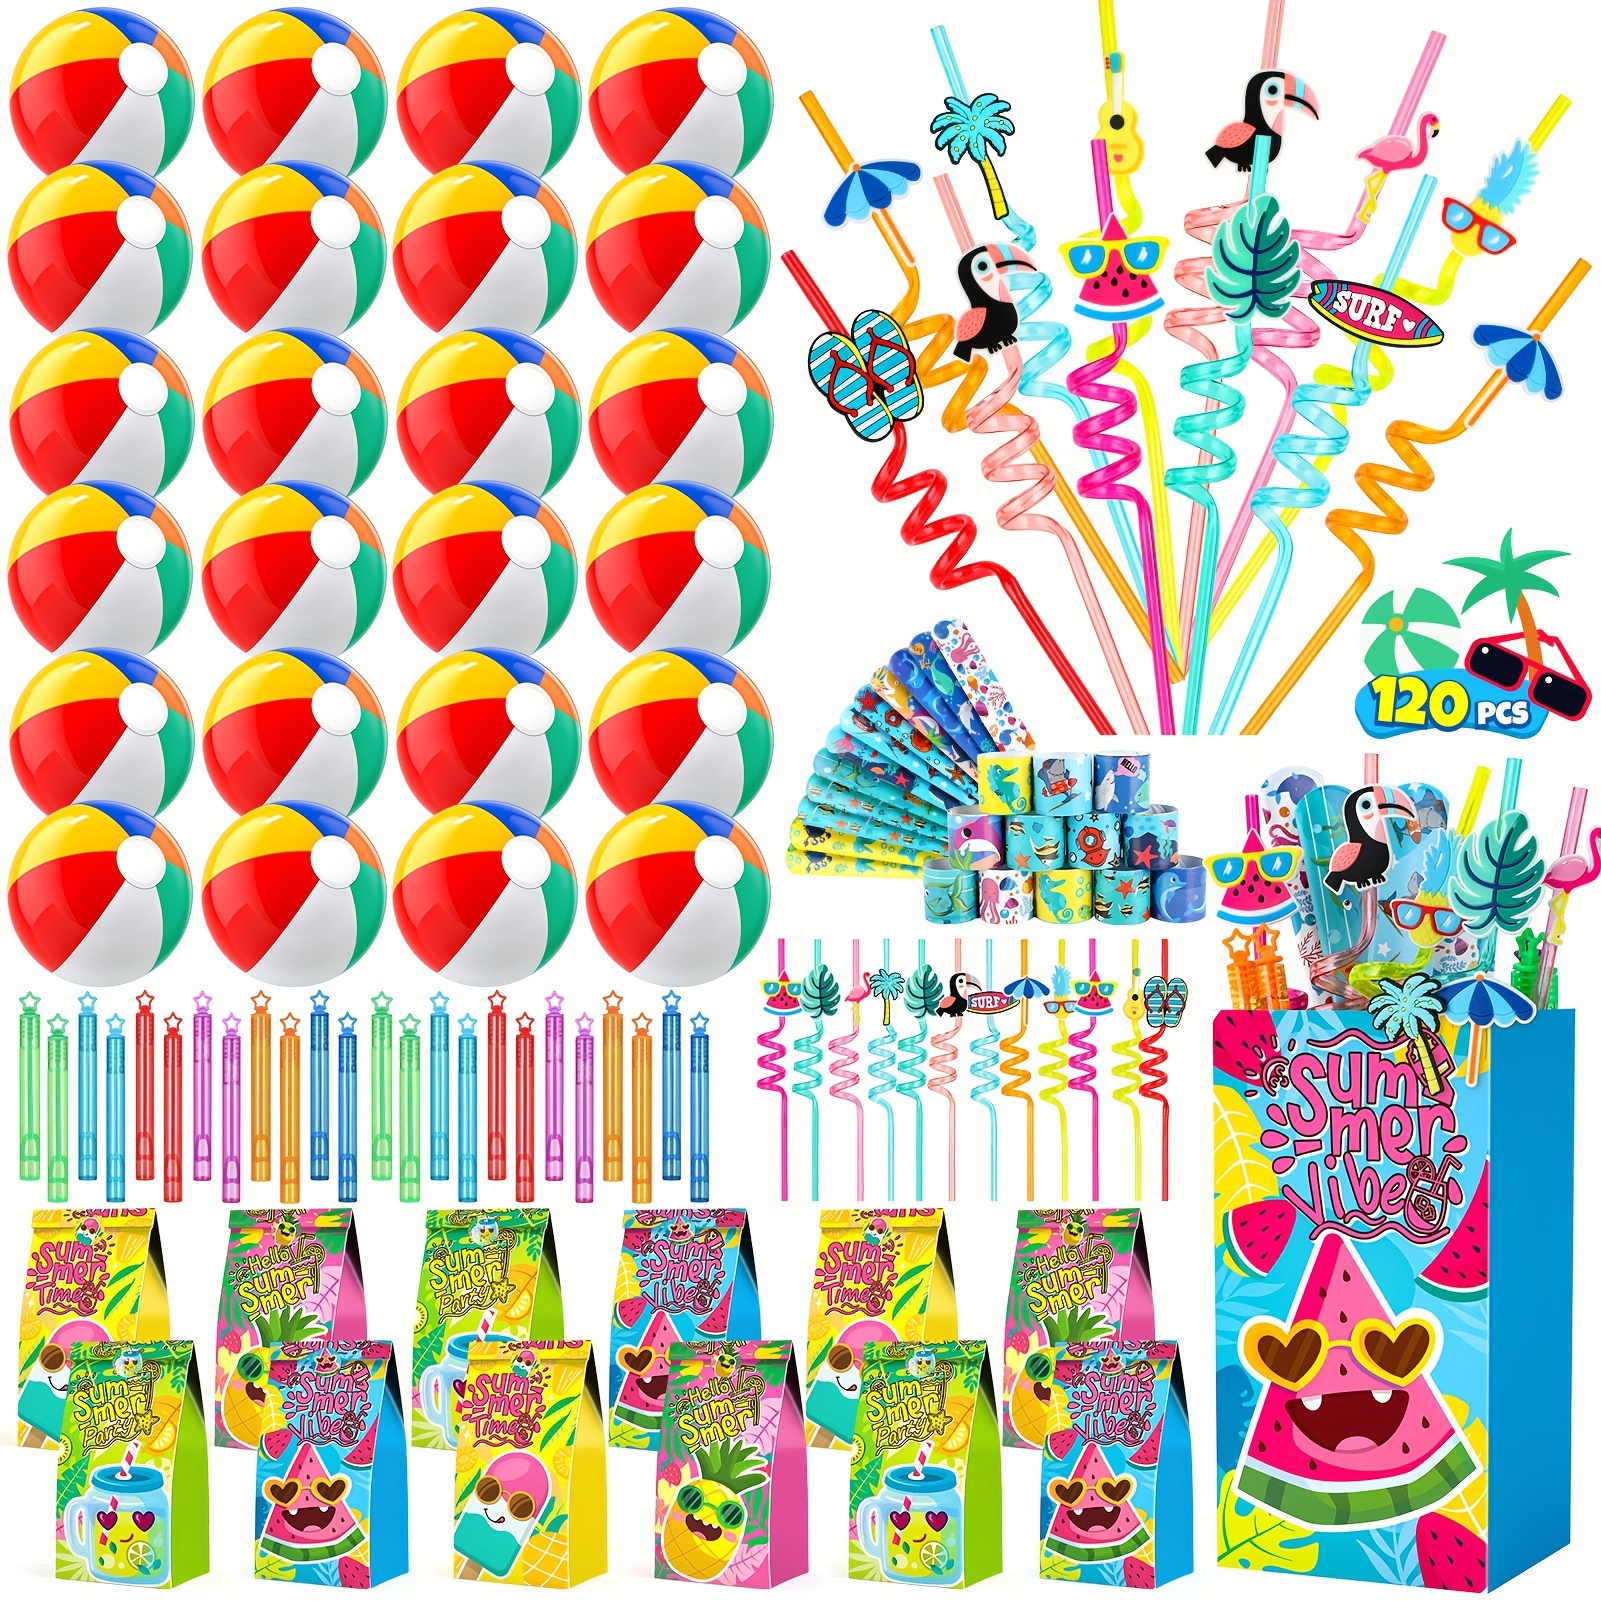 

Pool Party Favors And Beach Party Favors - 84 Pcs Party Bag Stuffers Including Beach Balls, Hand Fans, Kids Sunglasses, Bubble Wands, For Beach Pool Party Favors, Birthday Party Supplies 4-8 8-12